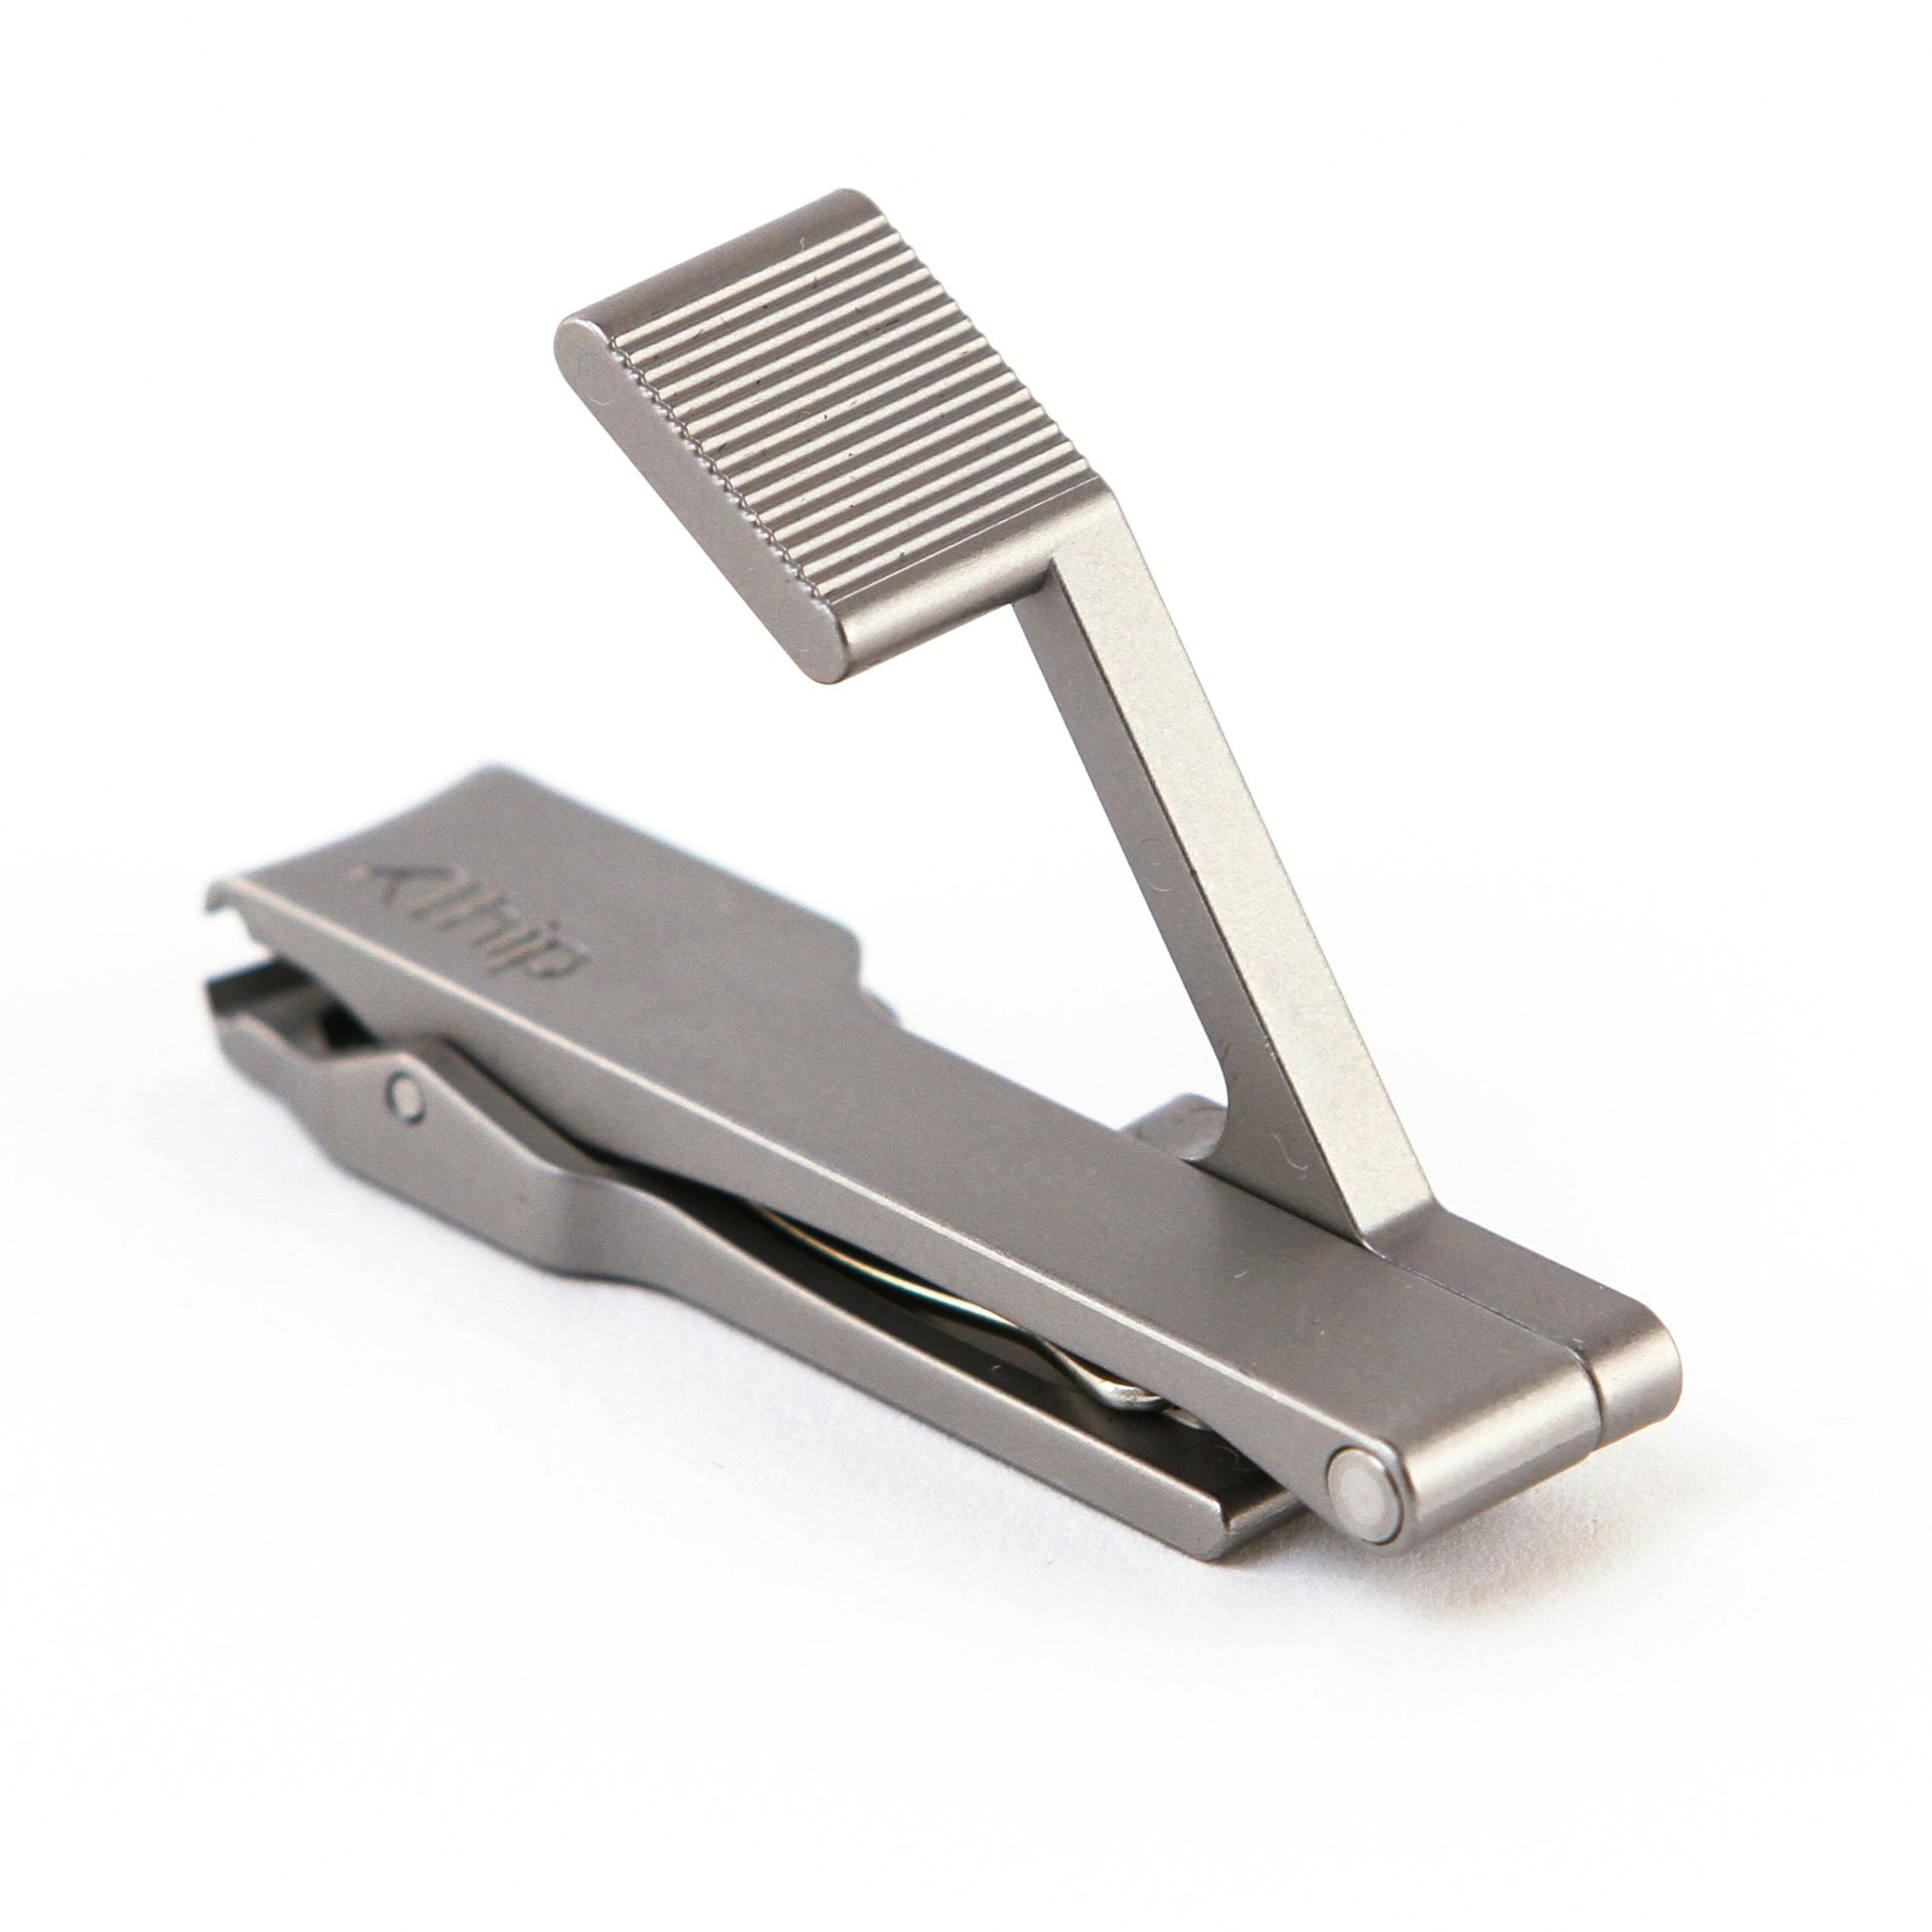 The Klhip® award-winning and patented nail clipper